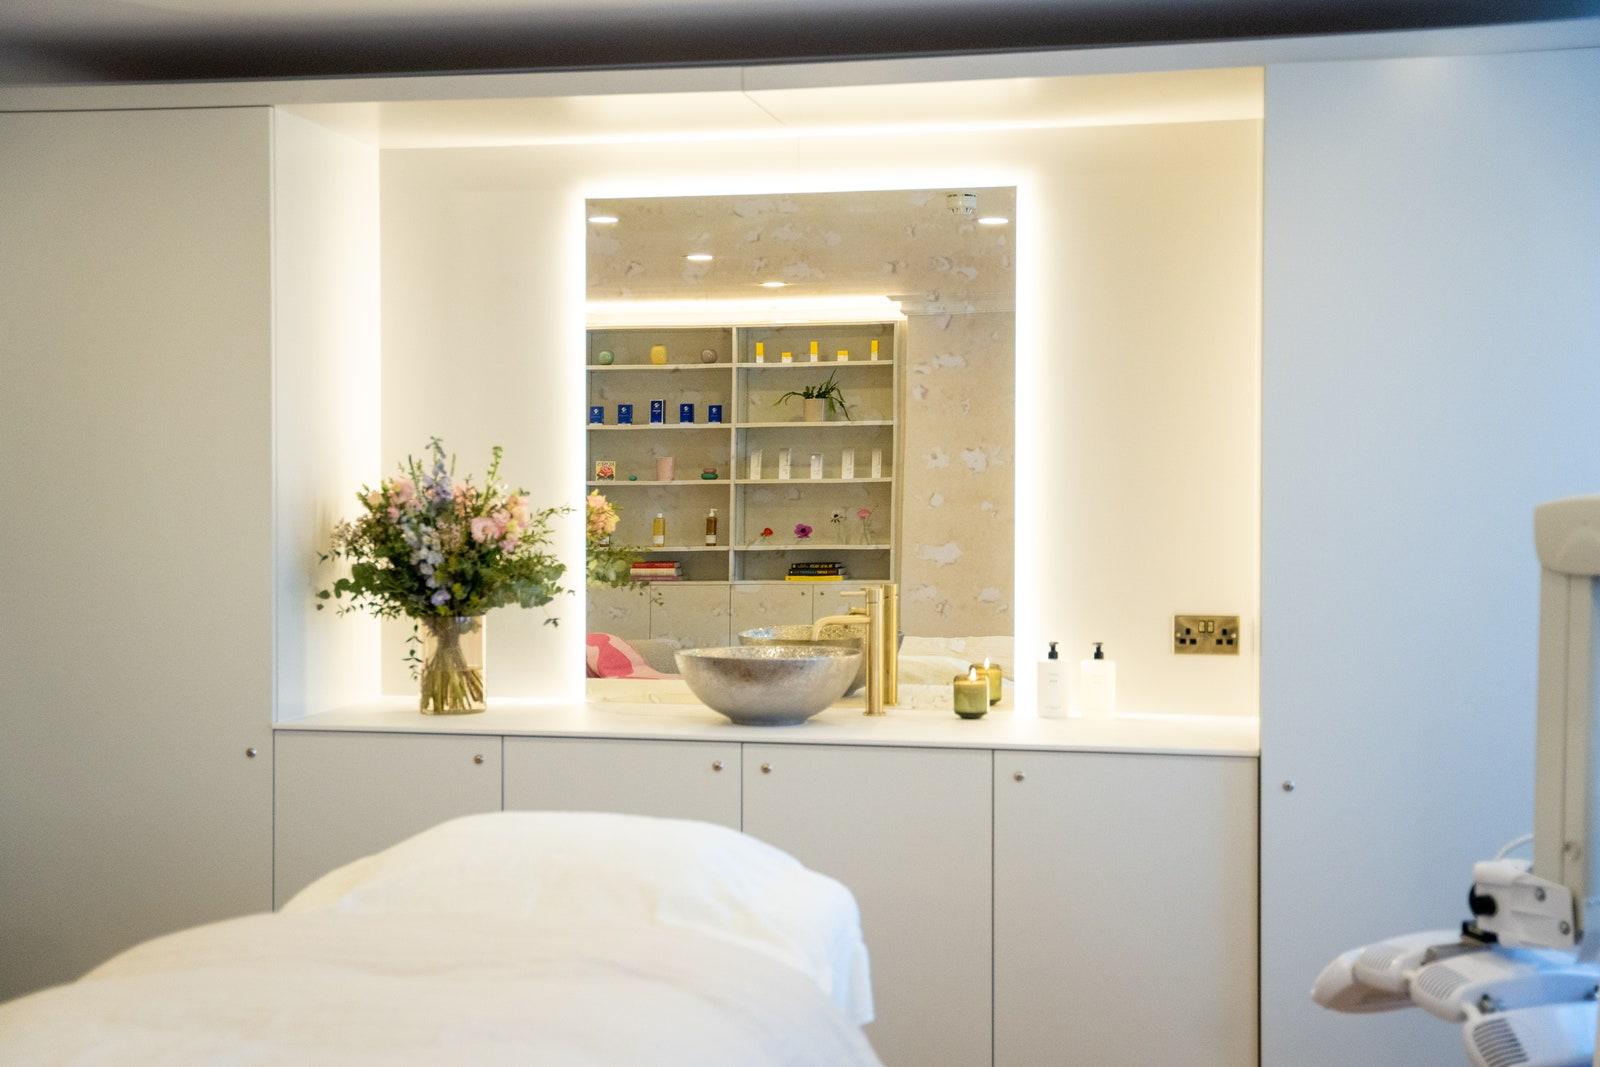 The best facials in London: 12 pre-holiday treatments